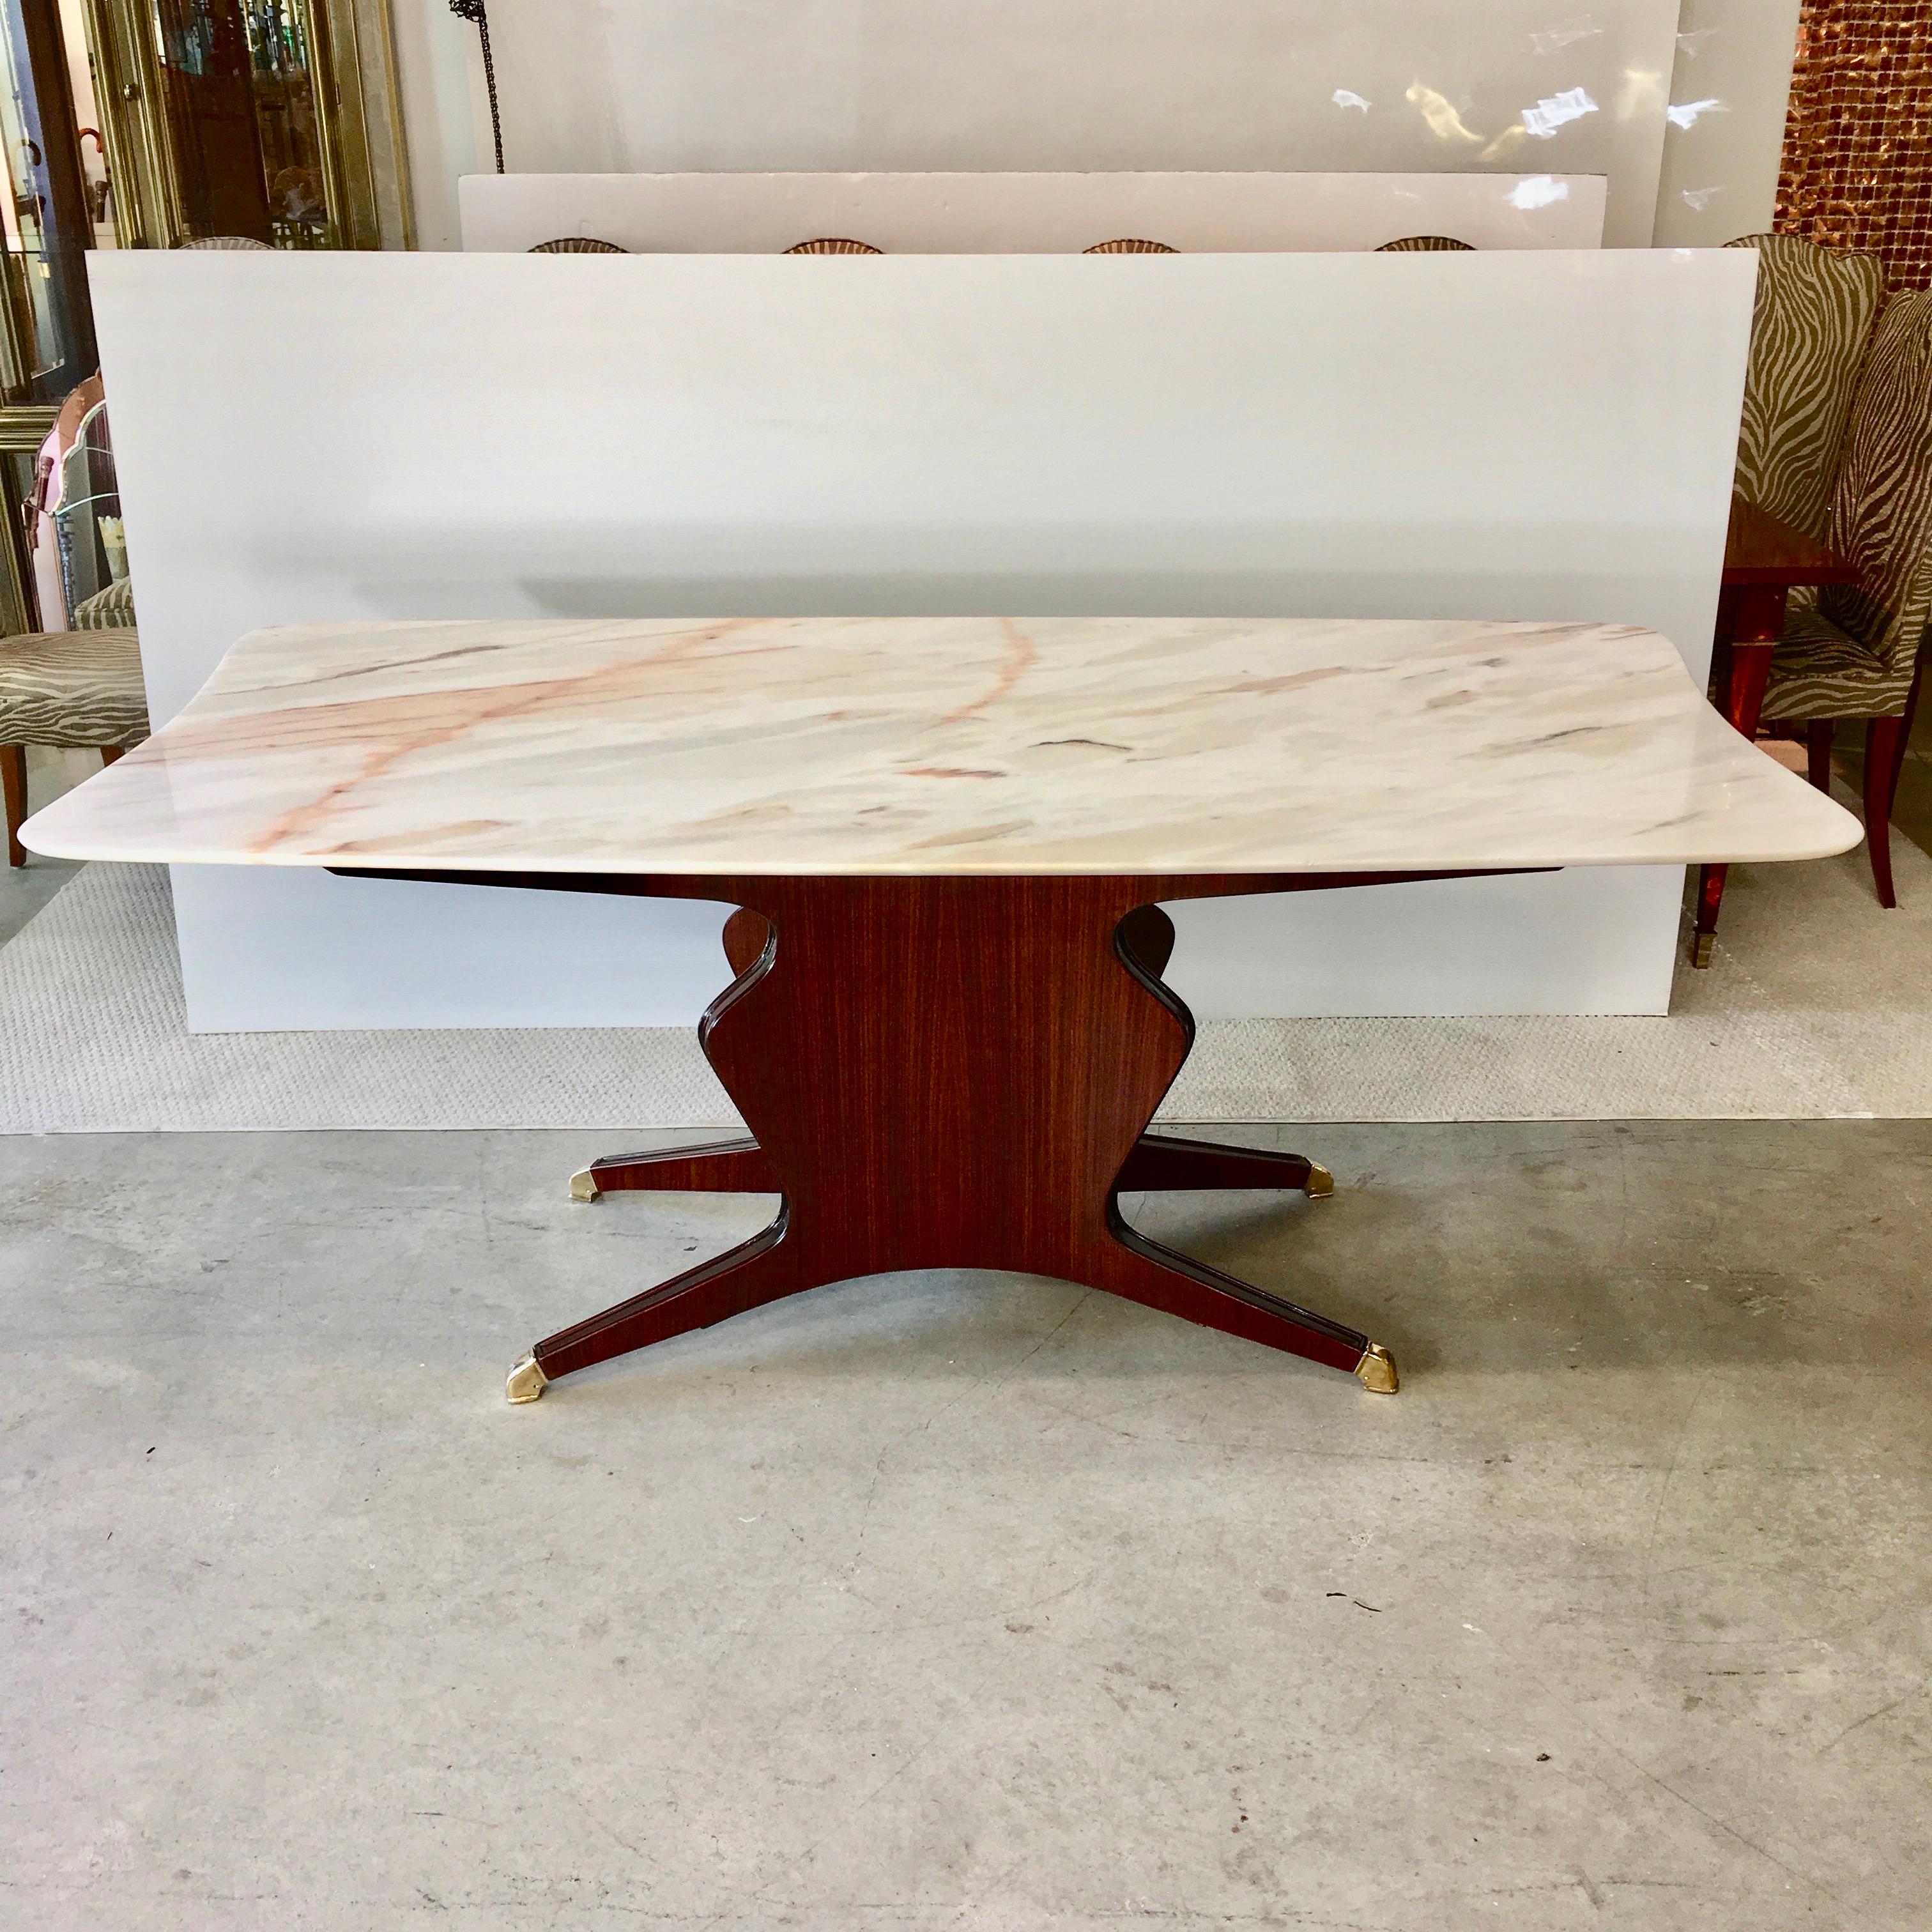 Elegant vintage Italian dining table designed by Osvaldo Borsani in 1951.
Boat shape rectangular marble top with free-form fish tail ends supported by under board on a sculptural vase-form base in richly hued polished mahogany, elevated on four